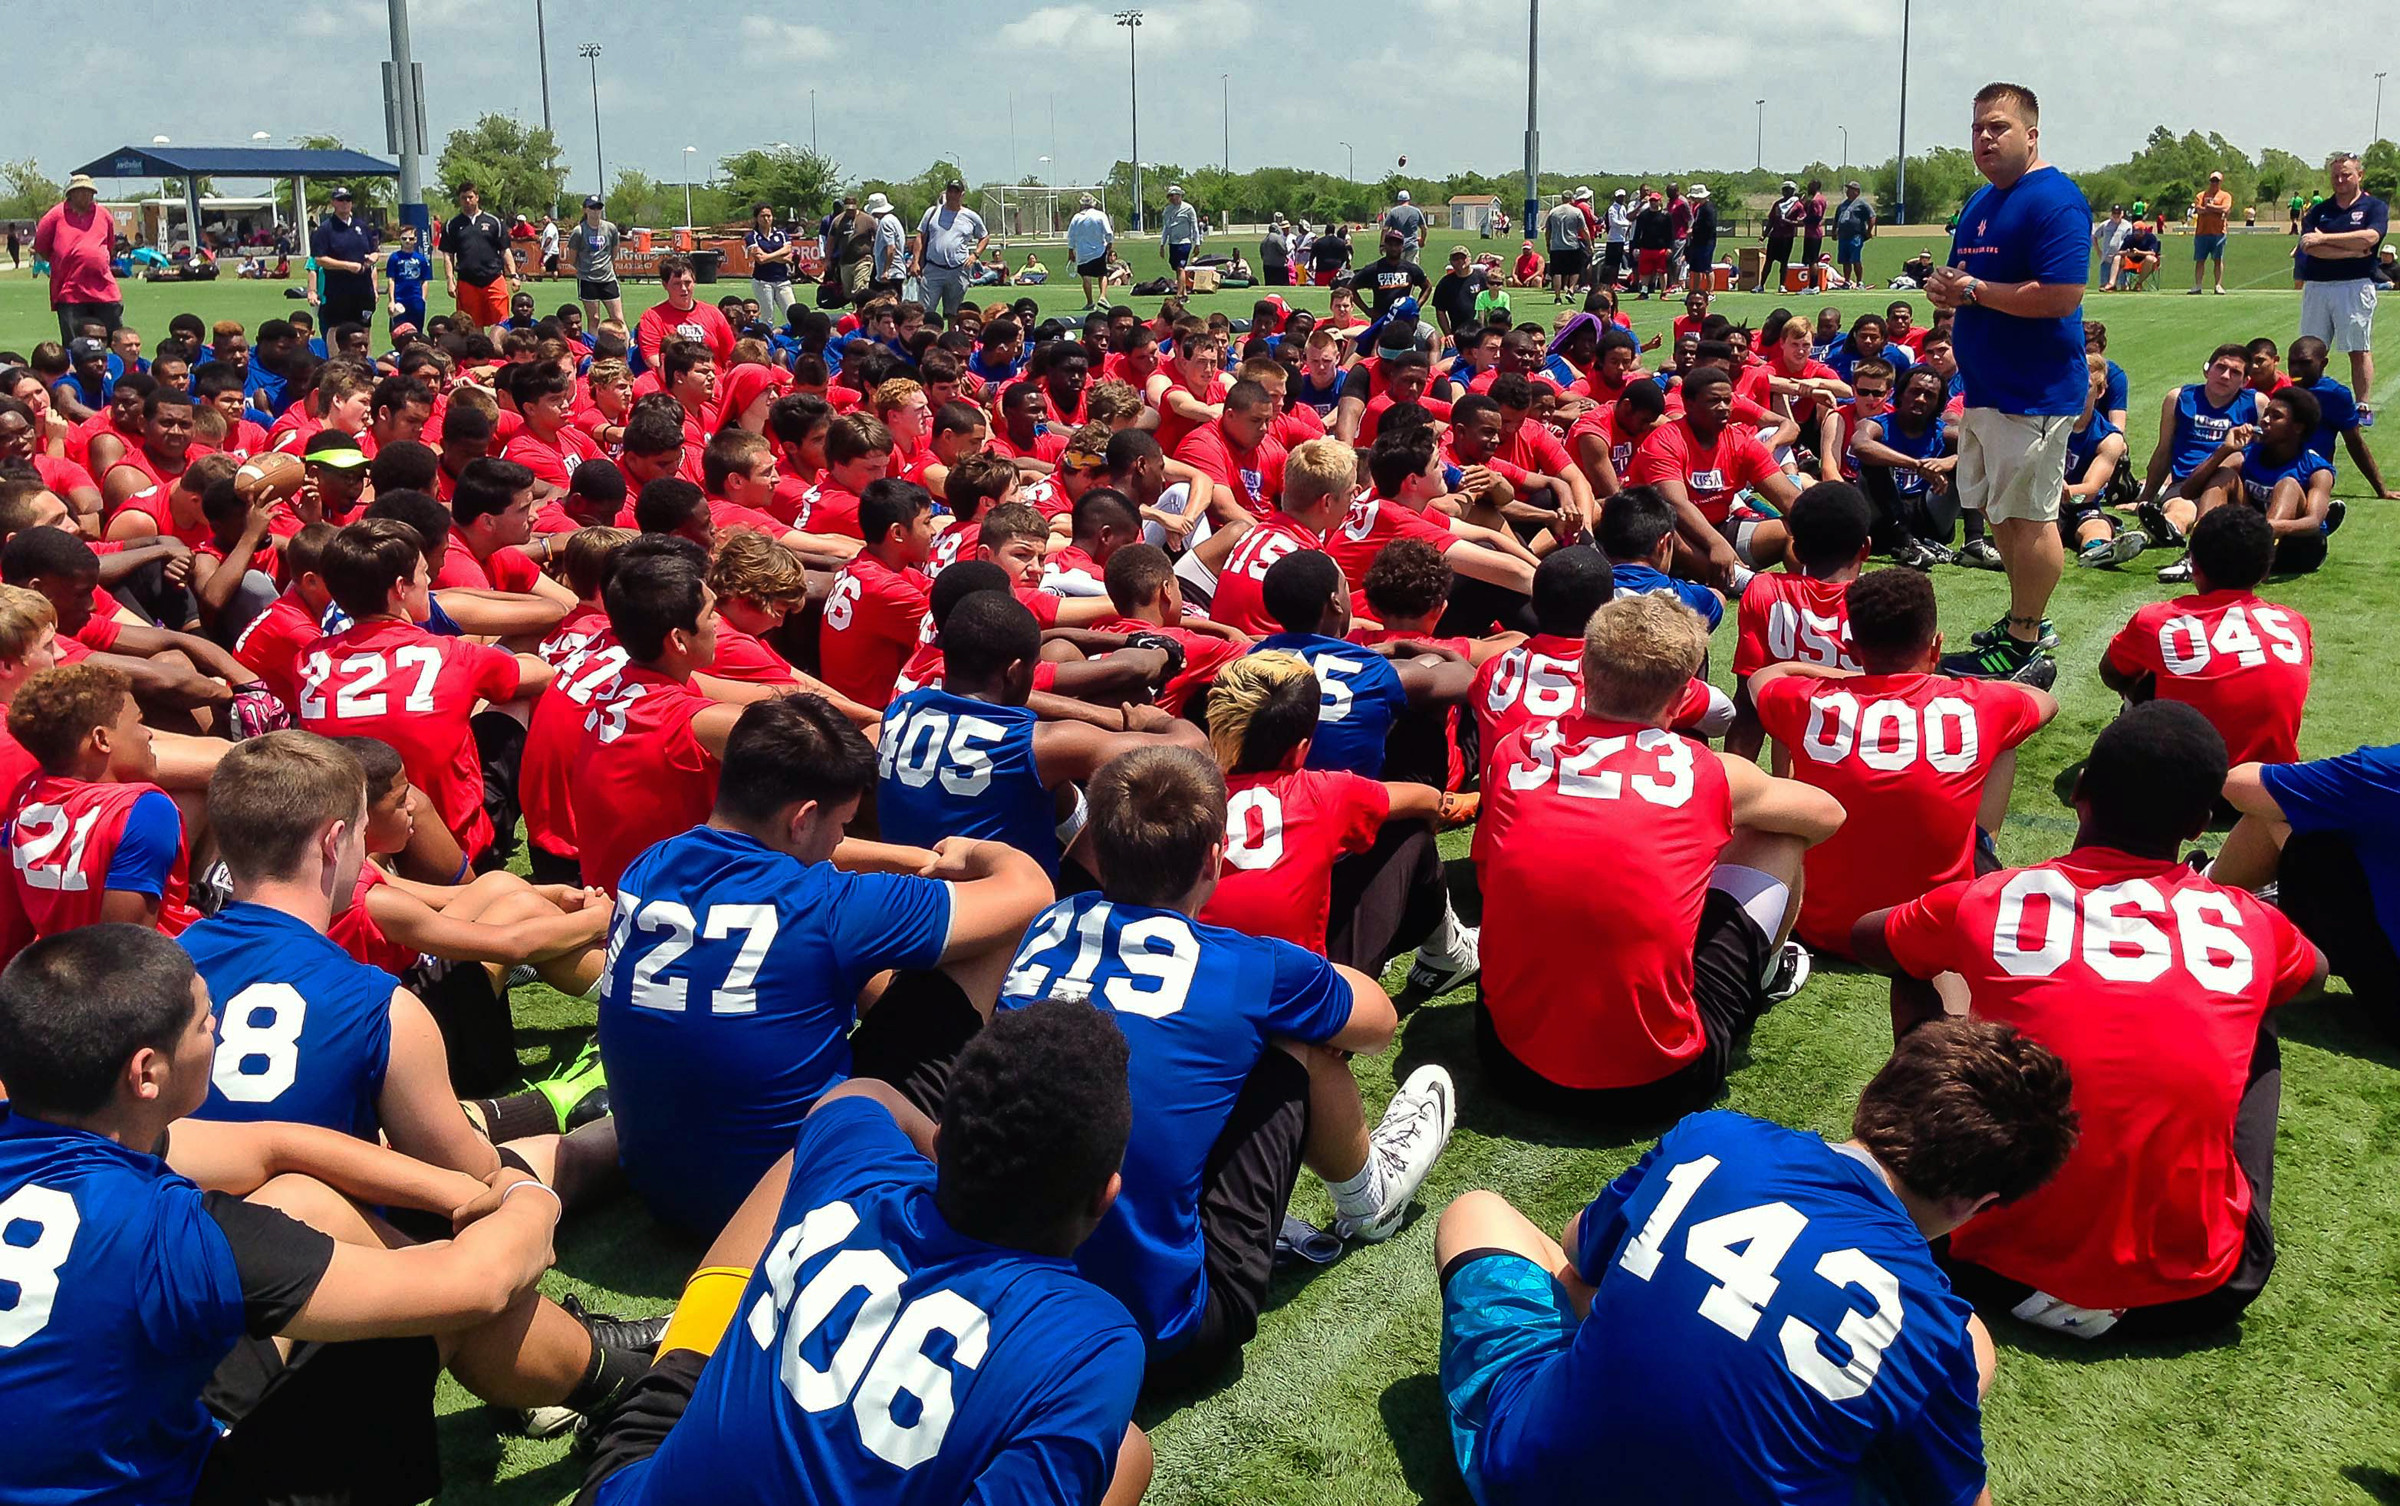 Donald Hooton Jr. addresses players at the USA Football regional football camp about the potential dangers of using performance-enhancing substances at the Houston Sports Park in Houston. Experimentation with human growth hormones by America's teens more than doubled in the last year, according to a large-scale national survey. Hooton works for the Taylor Hooton Foundation, named after his brother, Taylor, a 17-year-old high school athlete whose suicide in 2003 was blamed by his family on abuse of steroids.